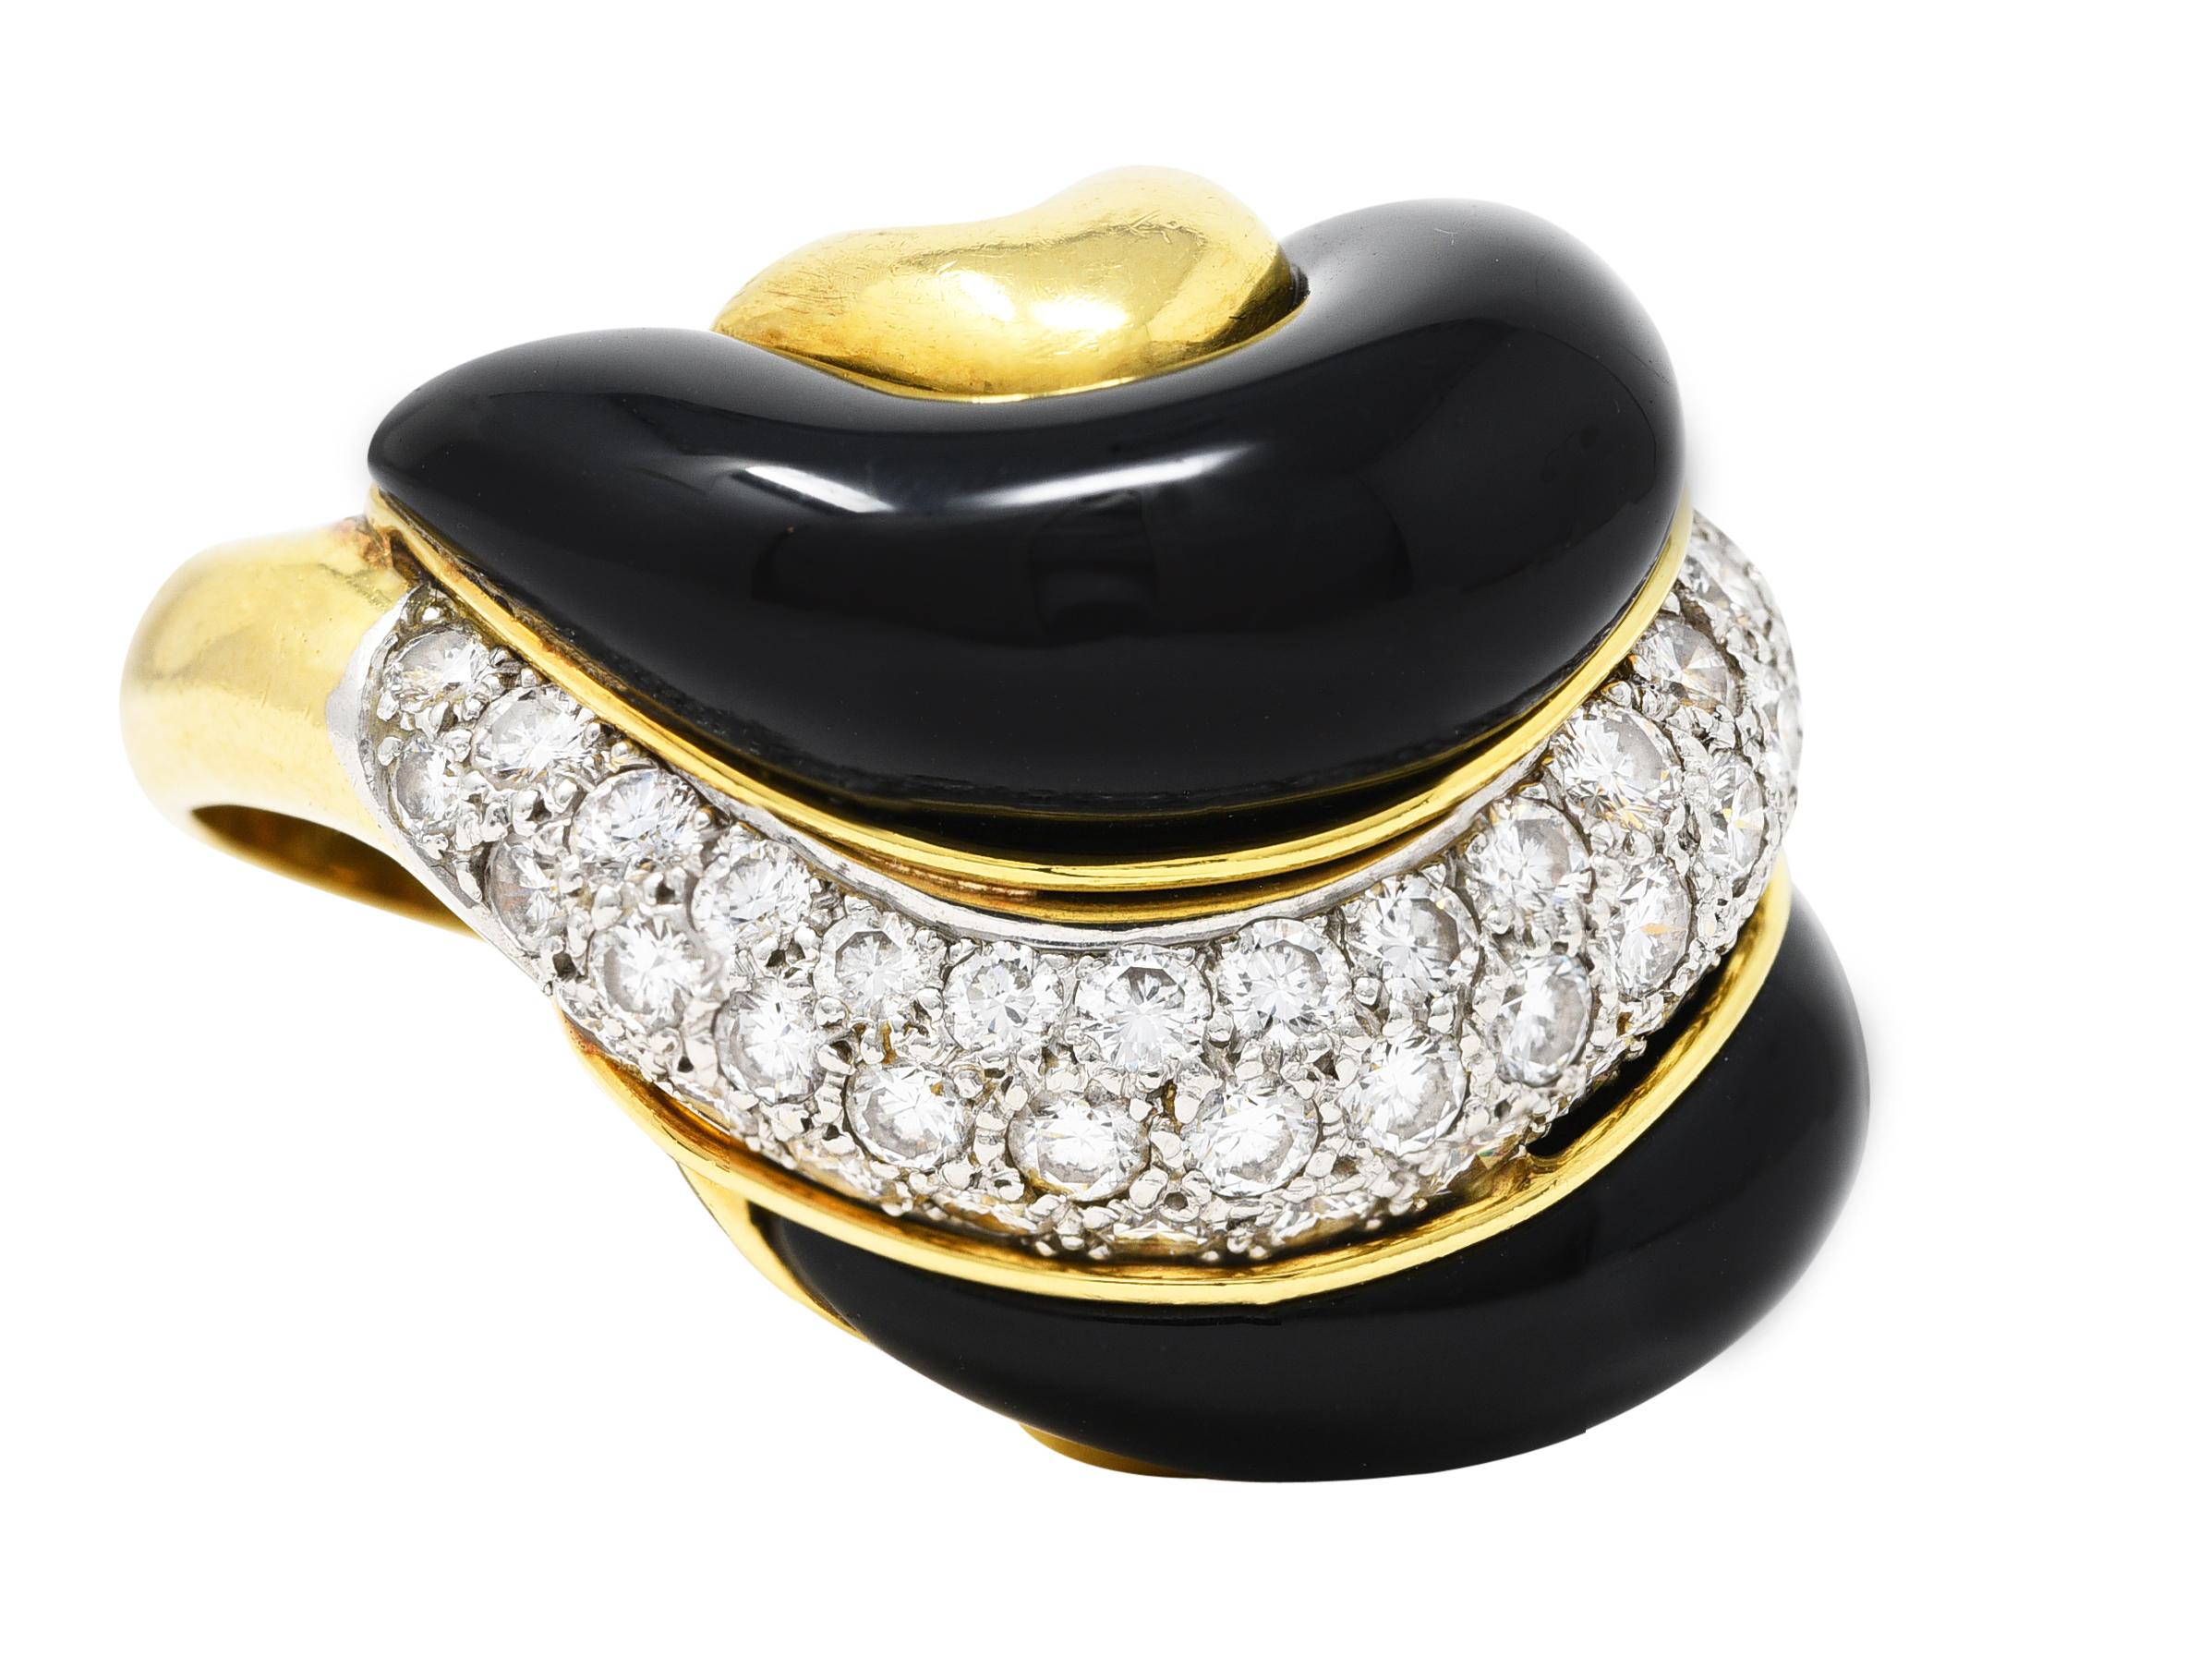 Designed as a domed form with a segmented swirl motif centering a row of round brilliant cut diamonds
Pavé set in platinum and weighing approximately 3.60 carats total - F/G color with VS2 clarity
Flanked by puffed rows of black enamel - glossy with